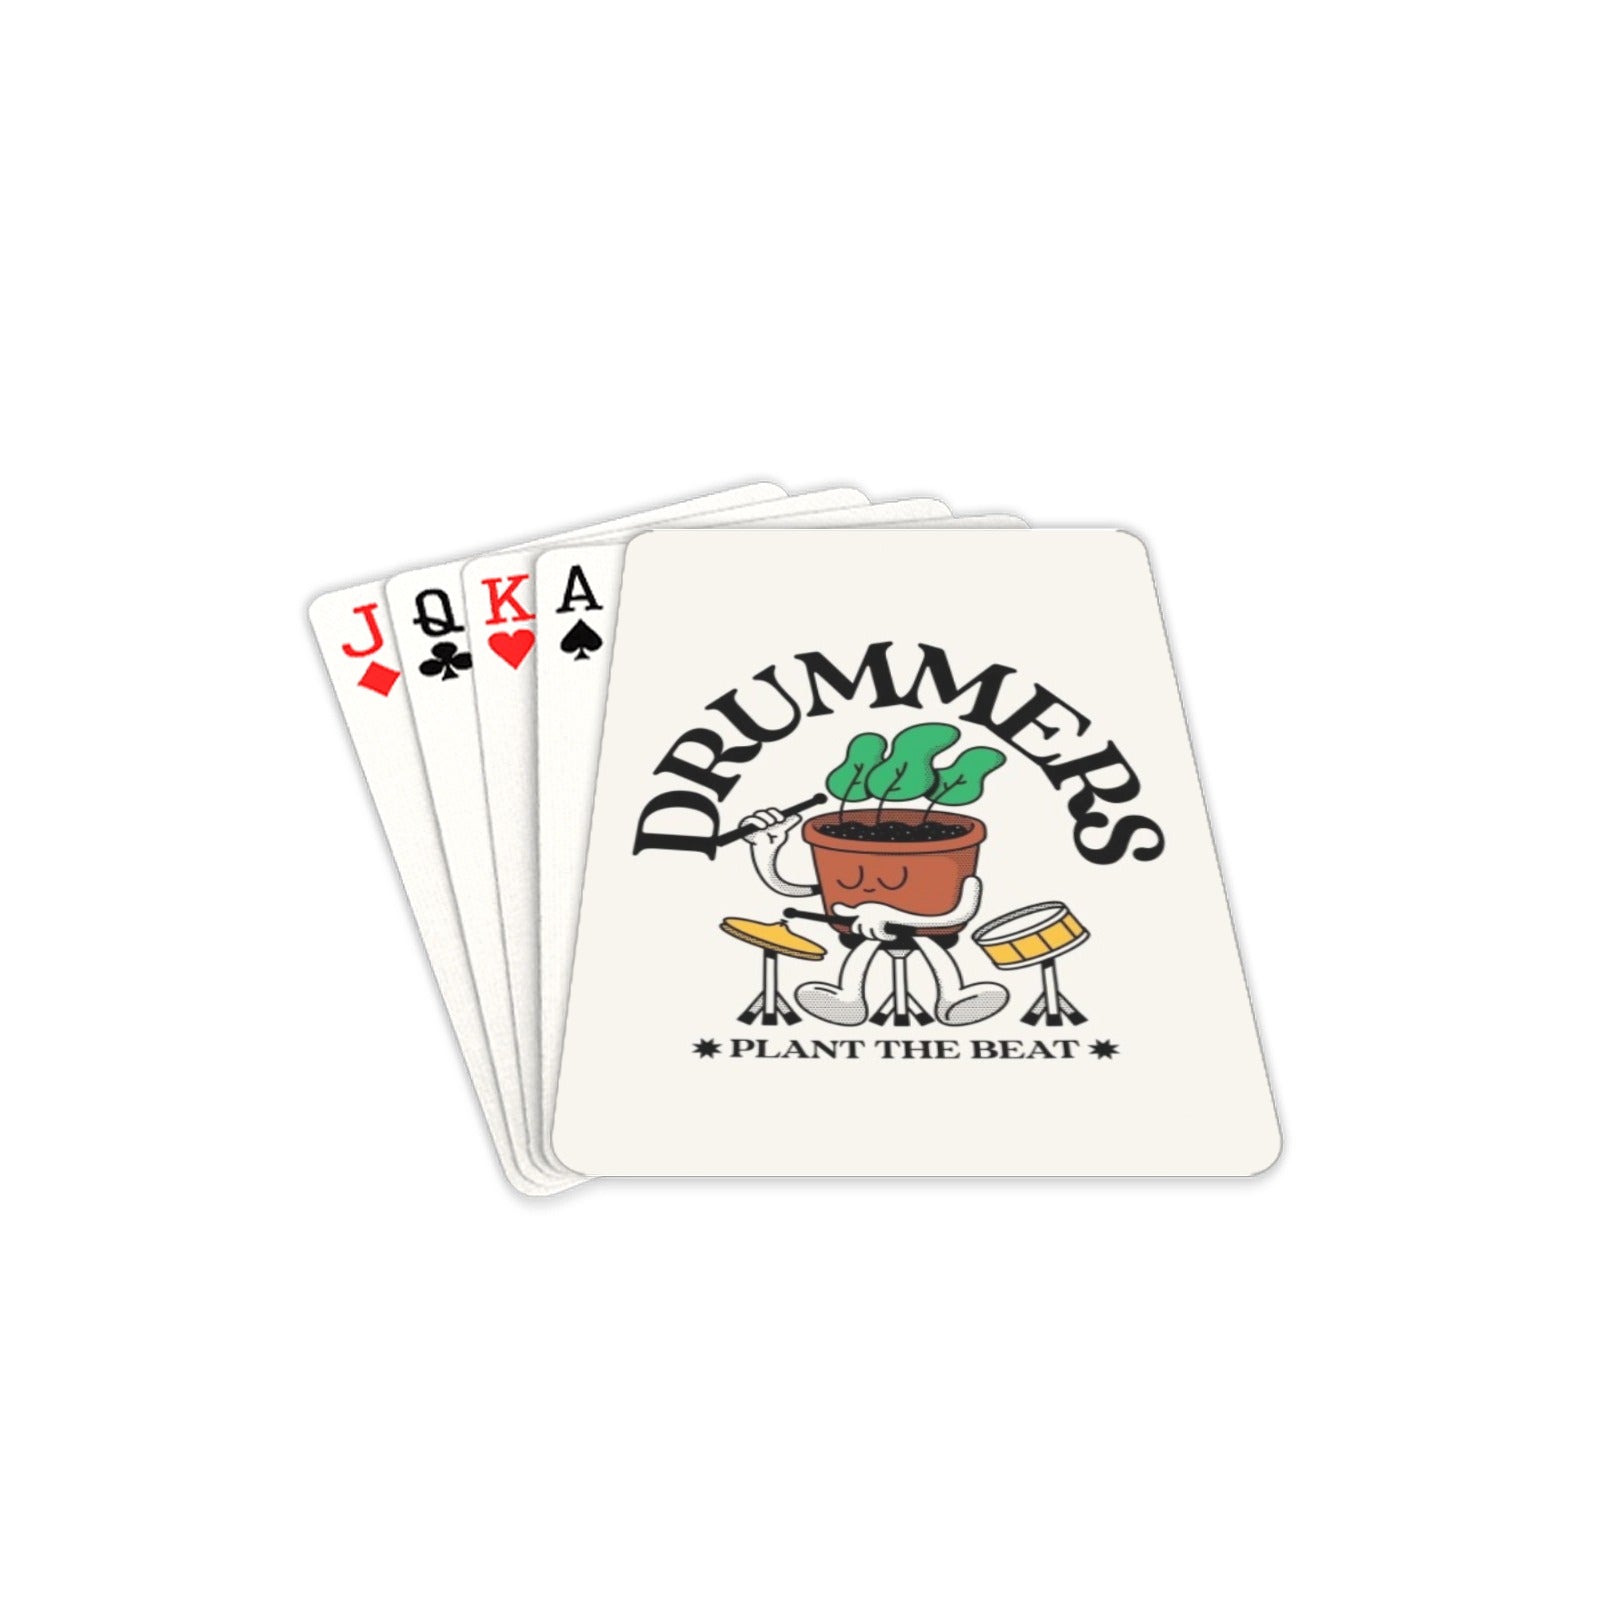 Drummers Plant The Beat - Playing Cards 2.5"x3.5" Playing Card 2.5"x3.5"